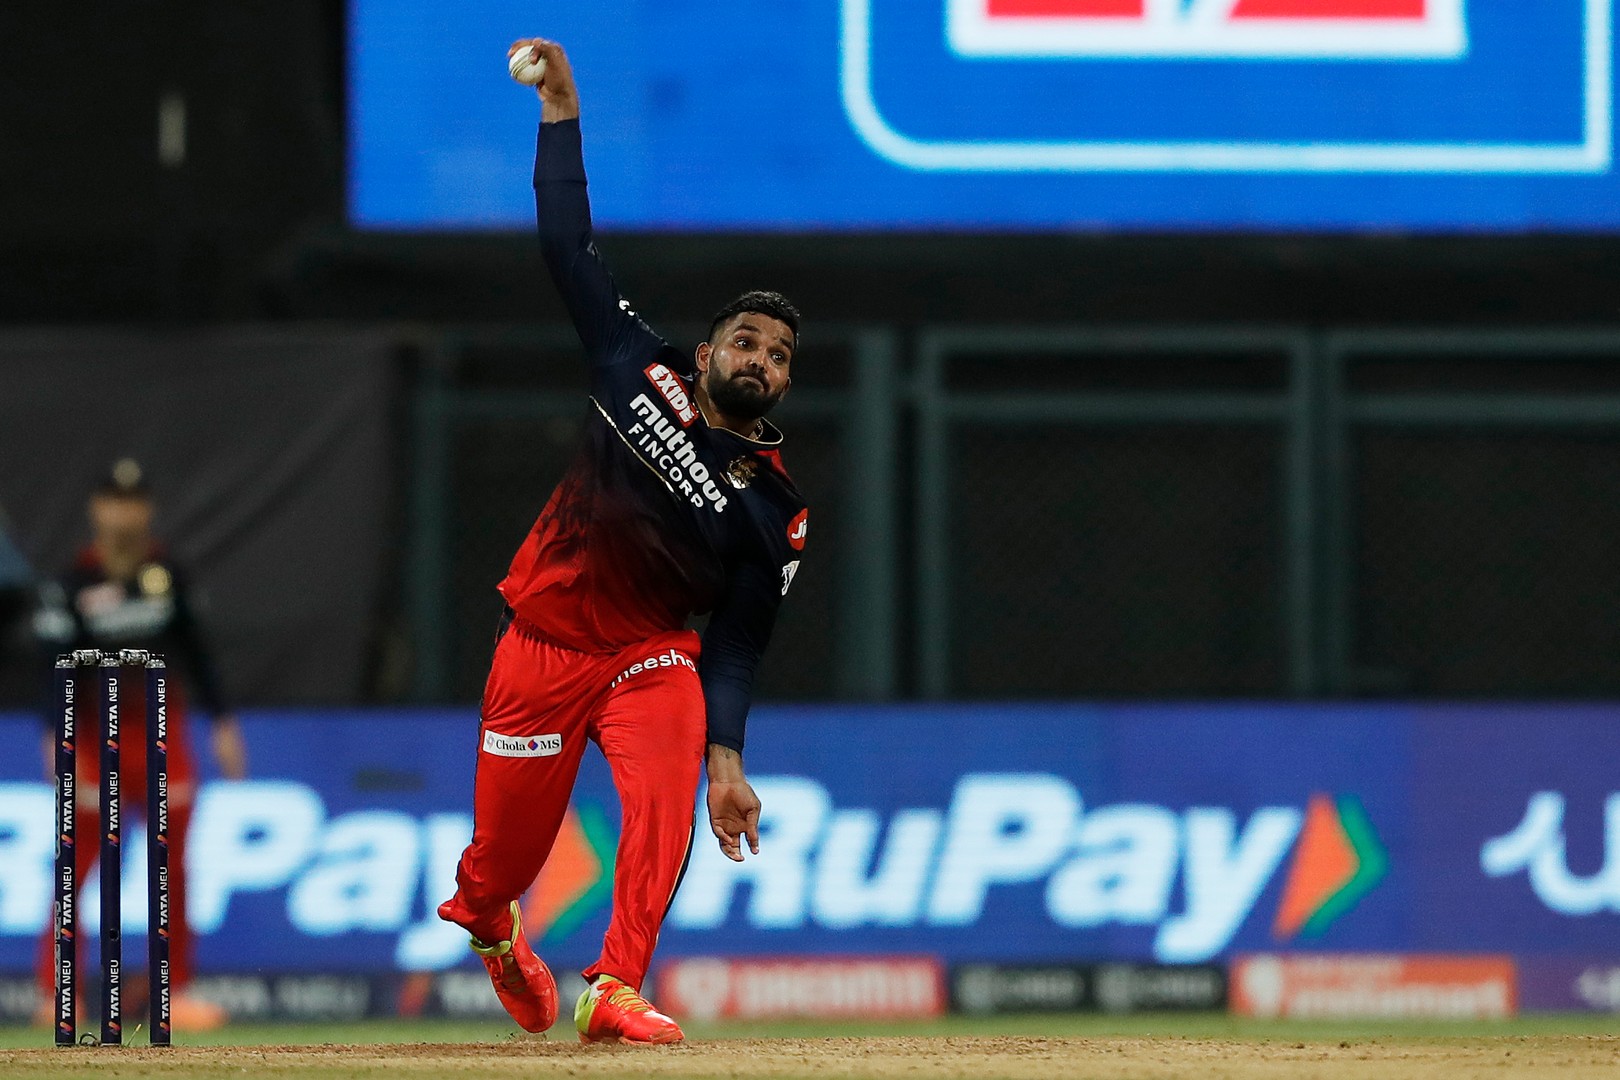 RCB VS GT, 19TH MAY, 2022, GAME 14 - 9